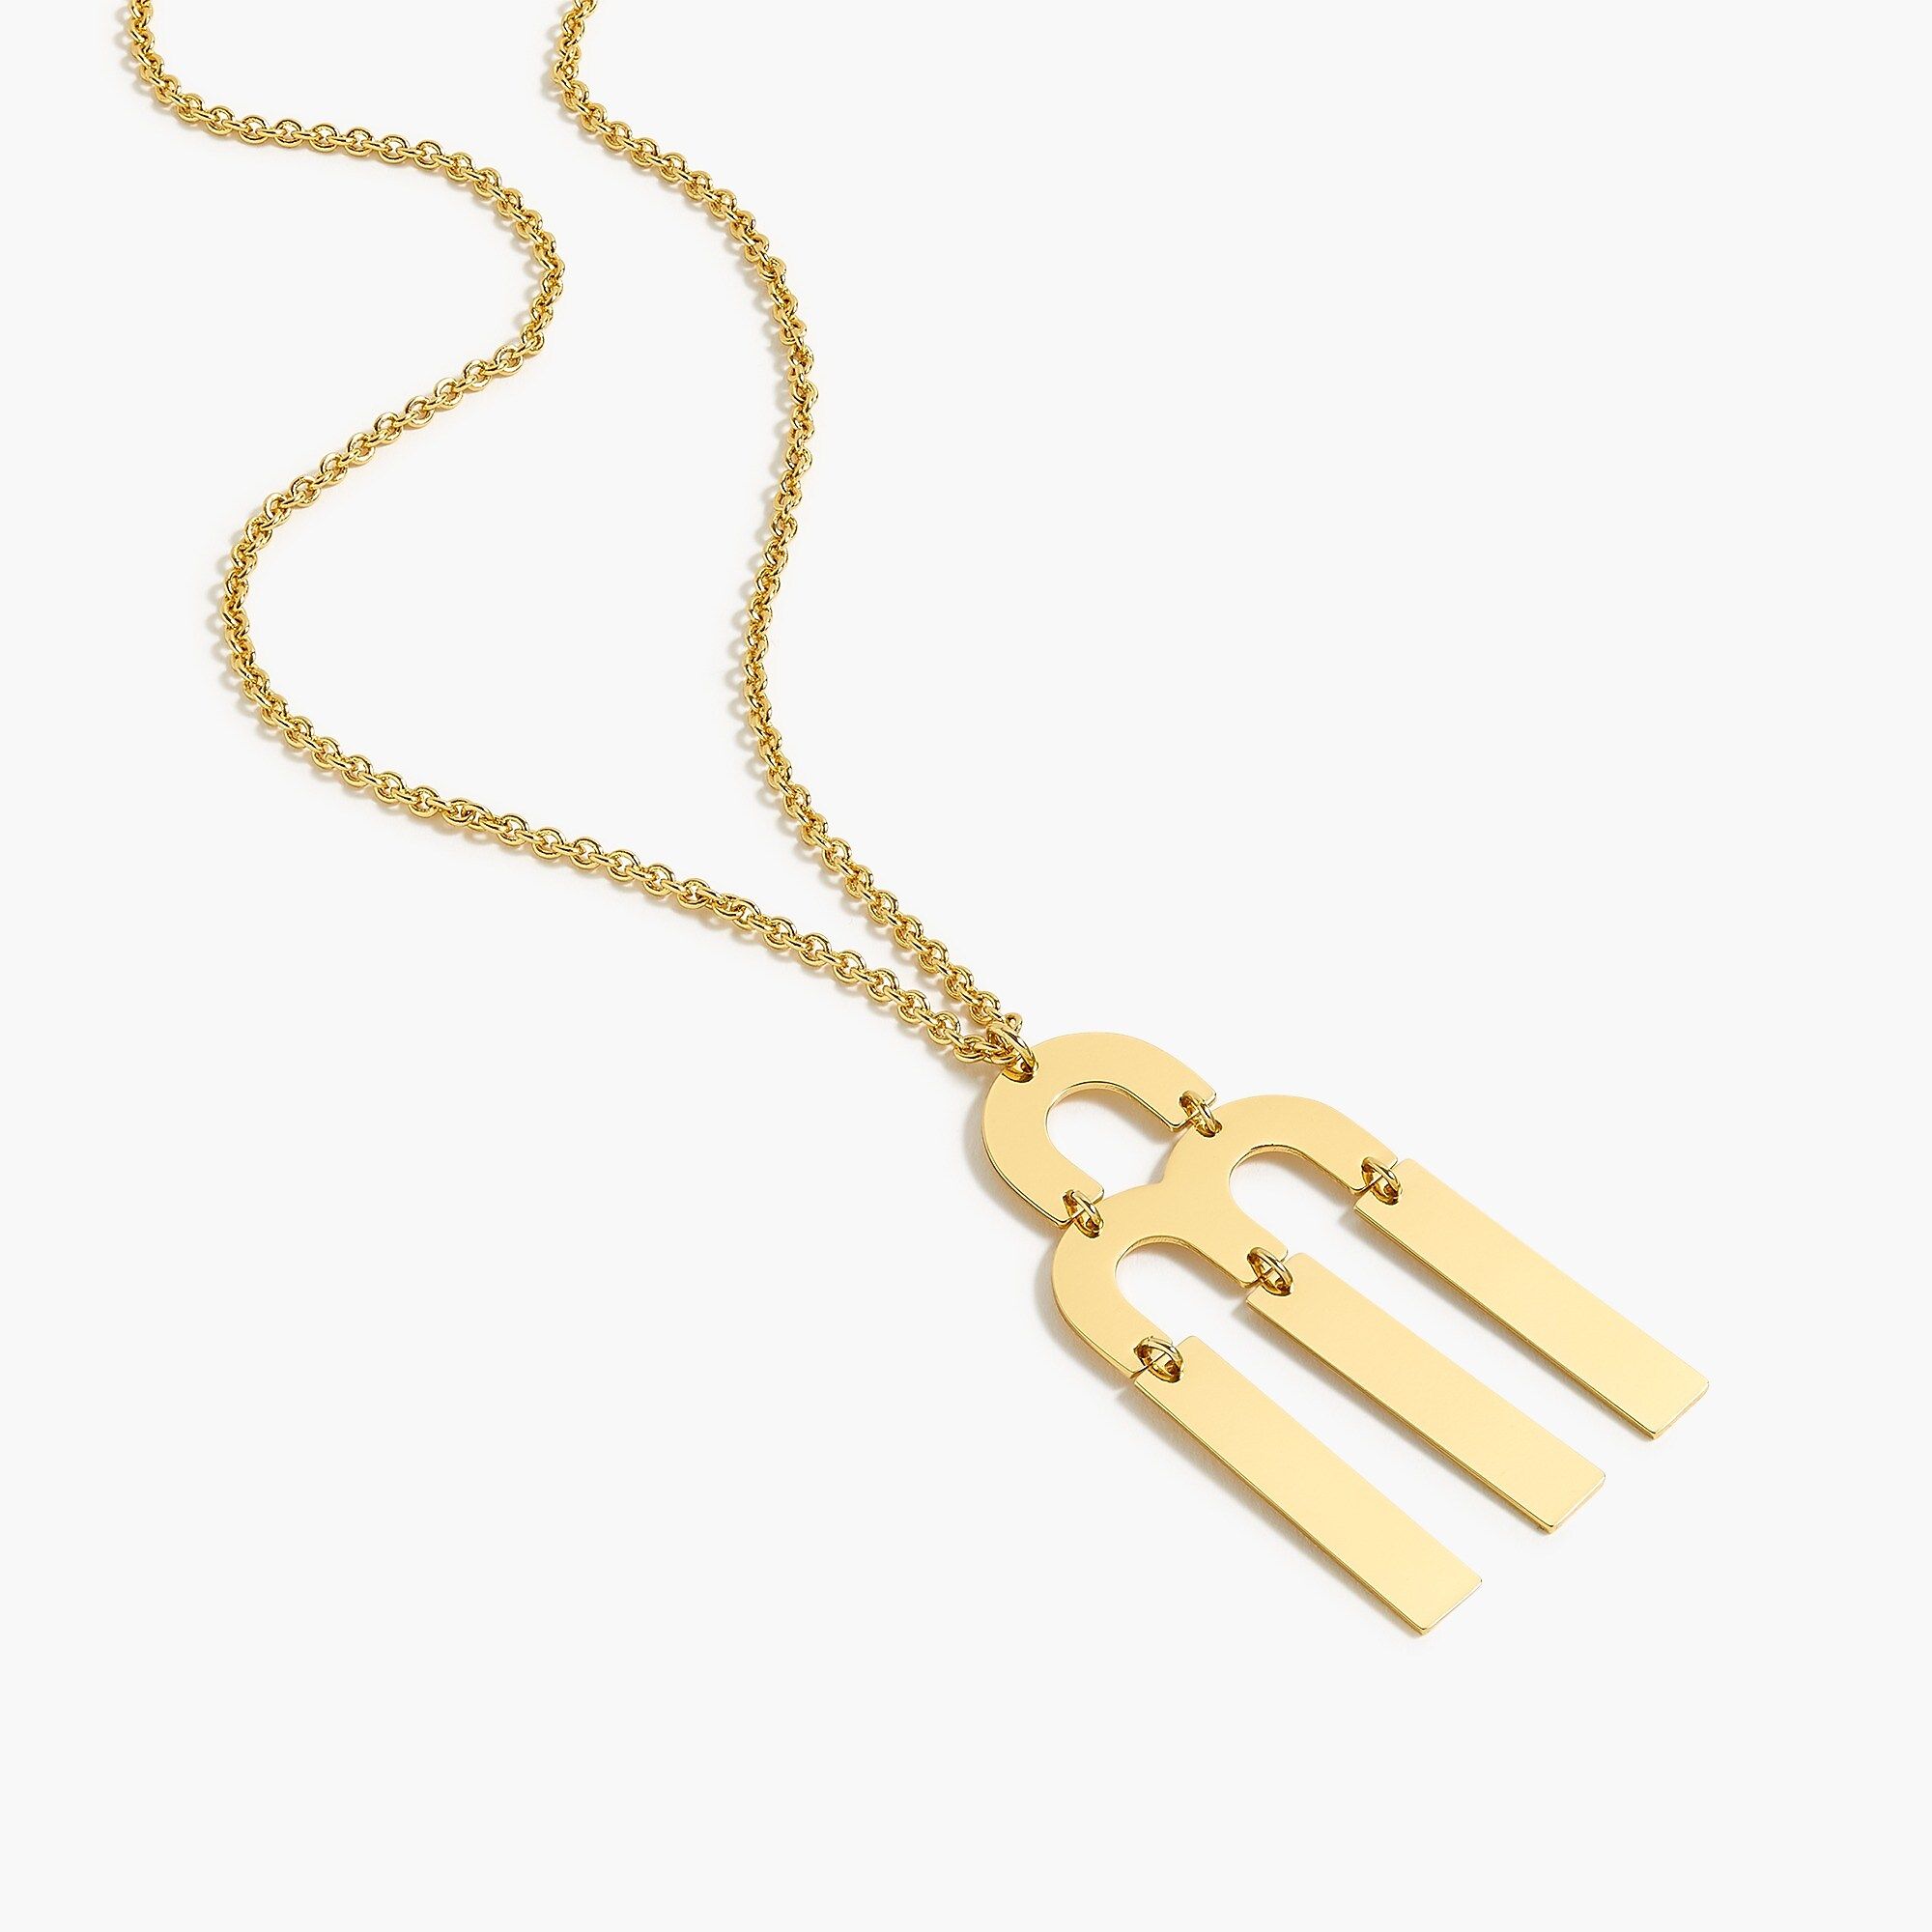 Tuning fork necklace | J.Crew US